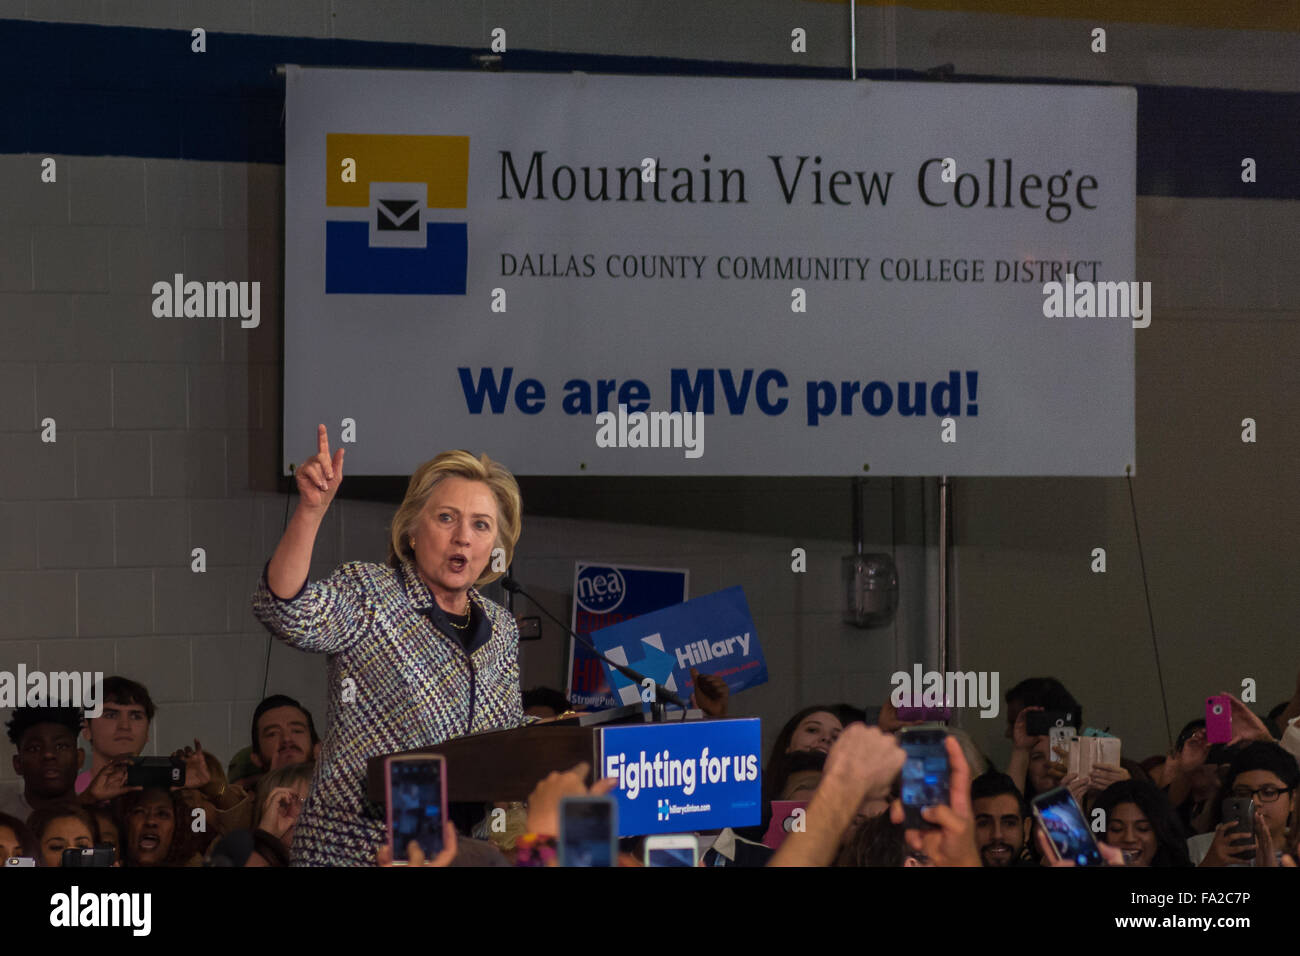 Democratic presidential candidate Hillary Clinton Speaks during a fundraiser at Mountain View College on November 17, 2015 in Dallas, TX. Stock Photo